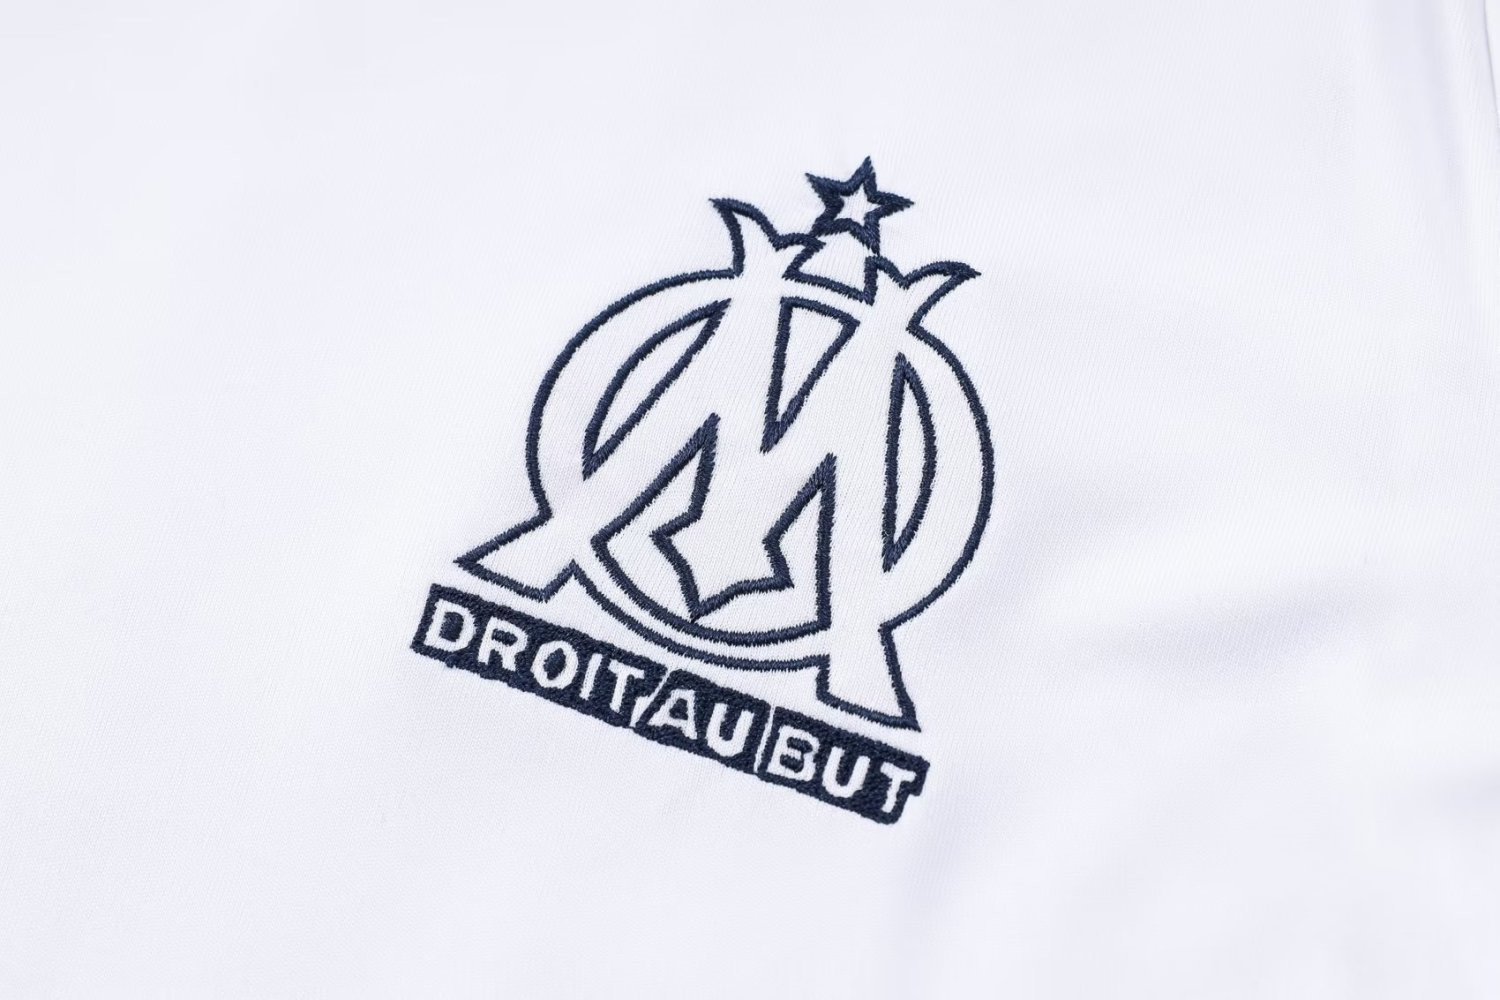 Olympique Marseille Soccer Training Jersey Replica White 2022/23 Mens